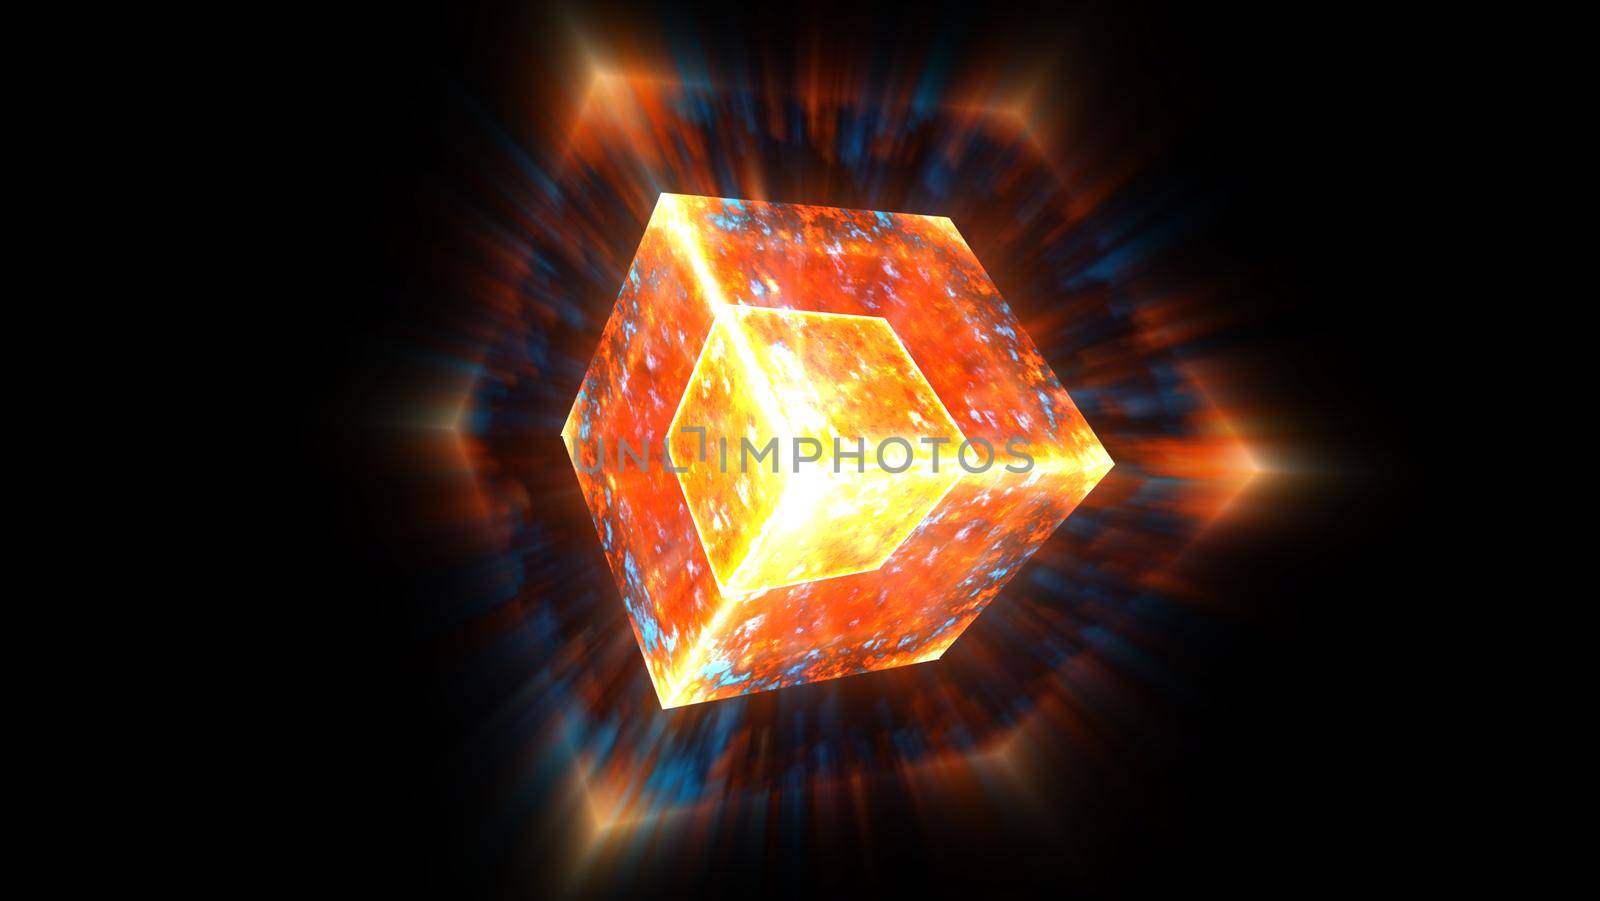 Eternal flame power overwhelming cube mystery core full energy surface and blur ray around on black background